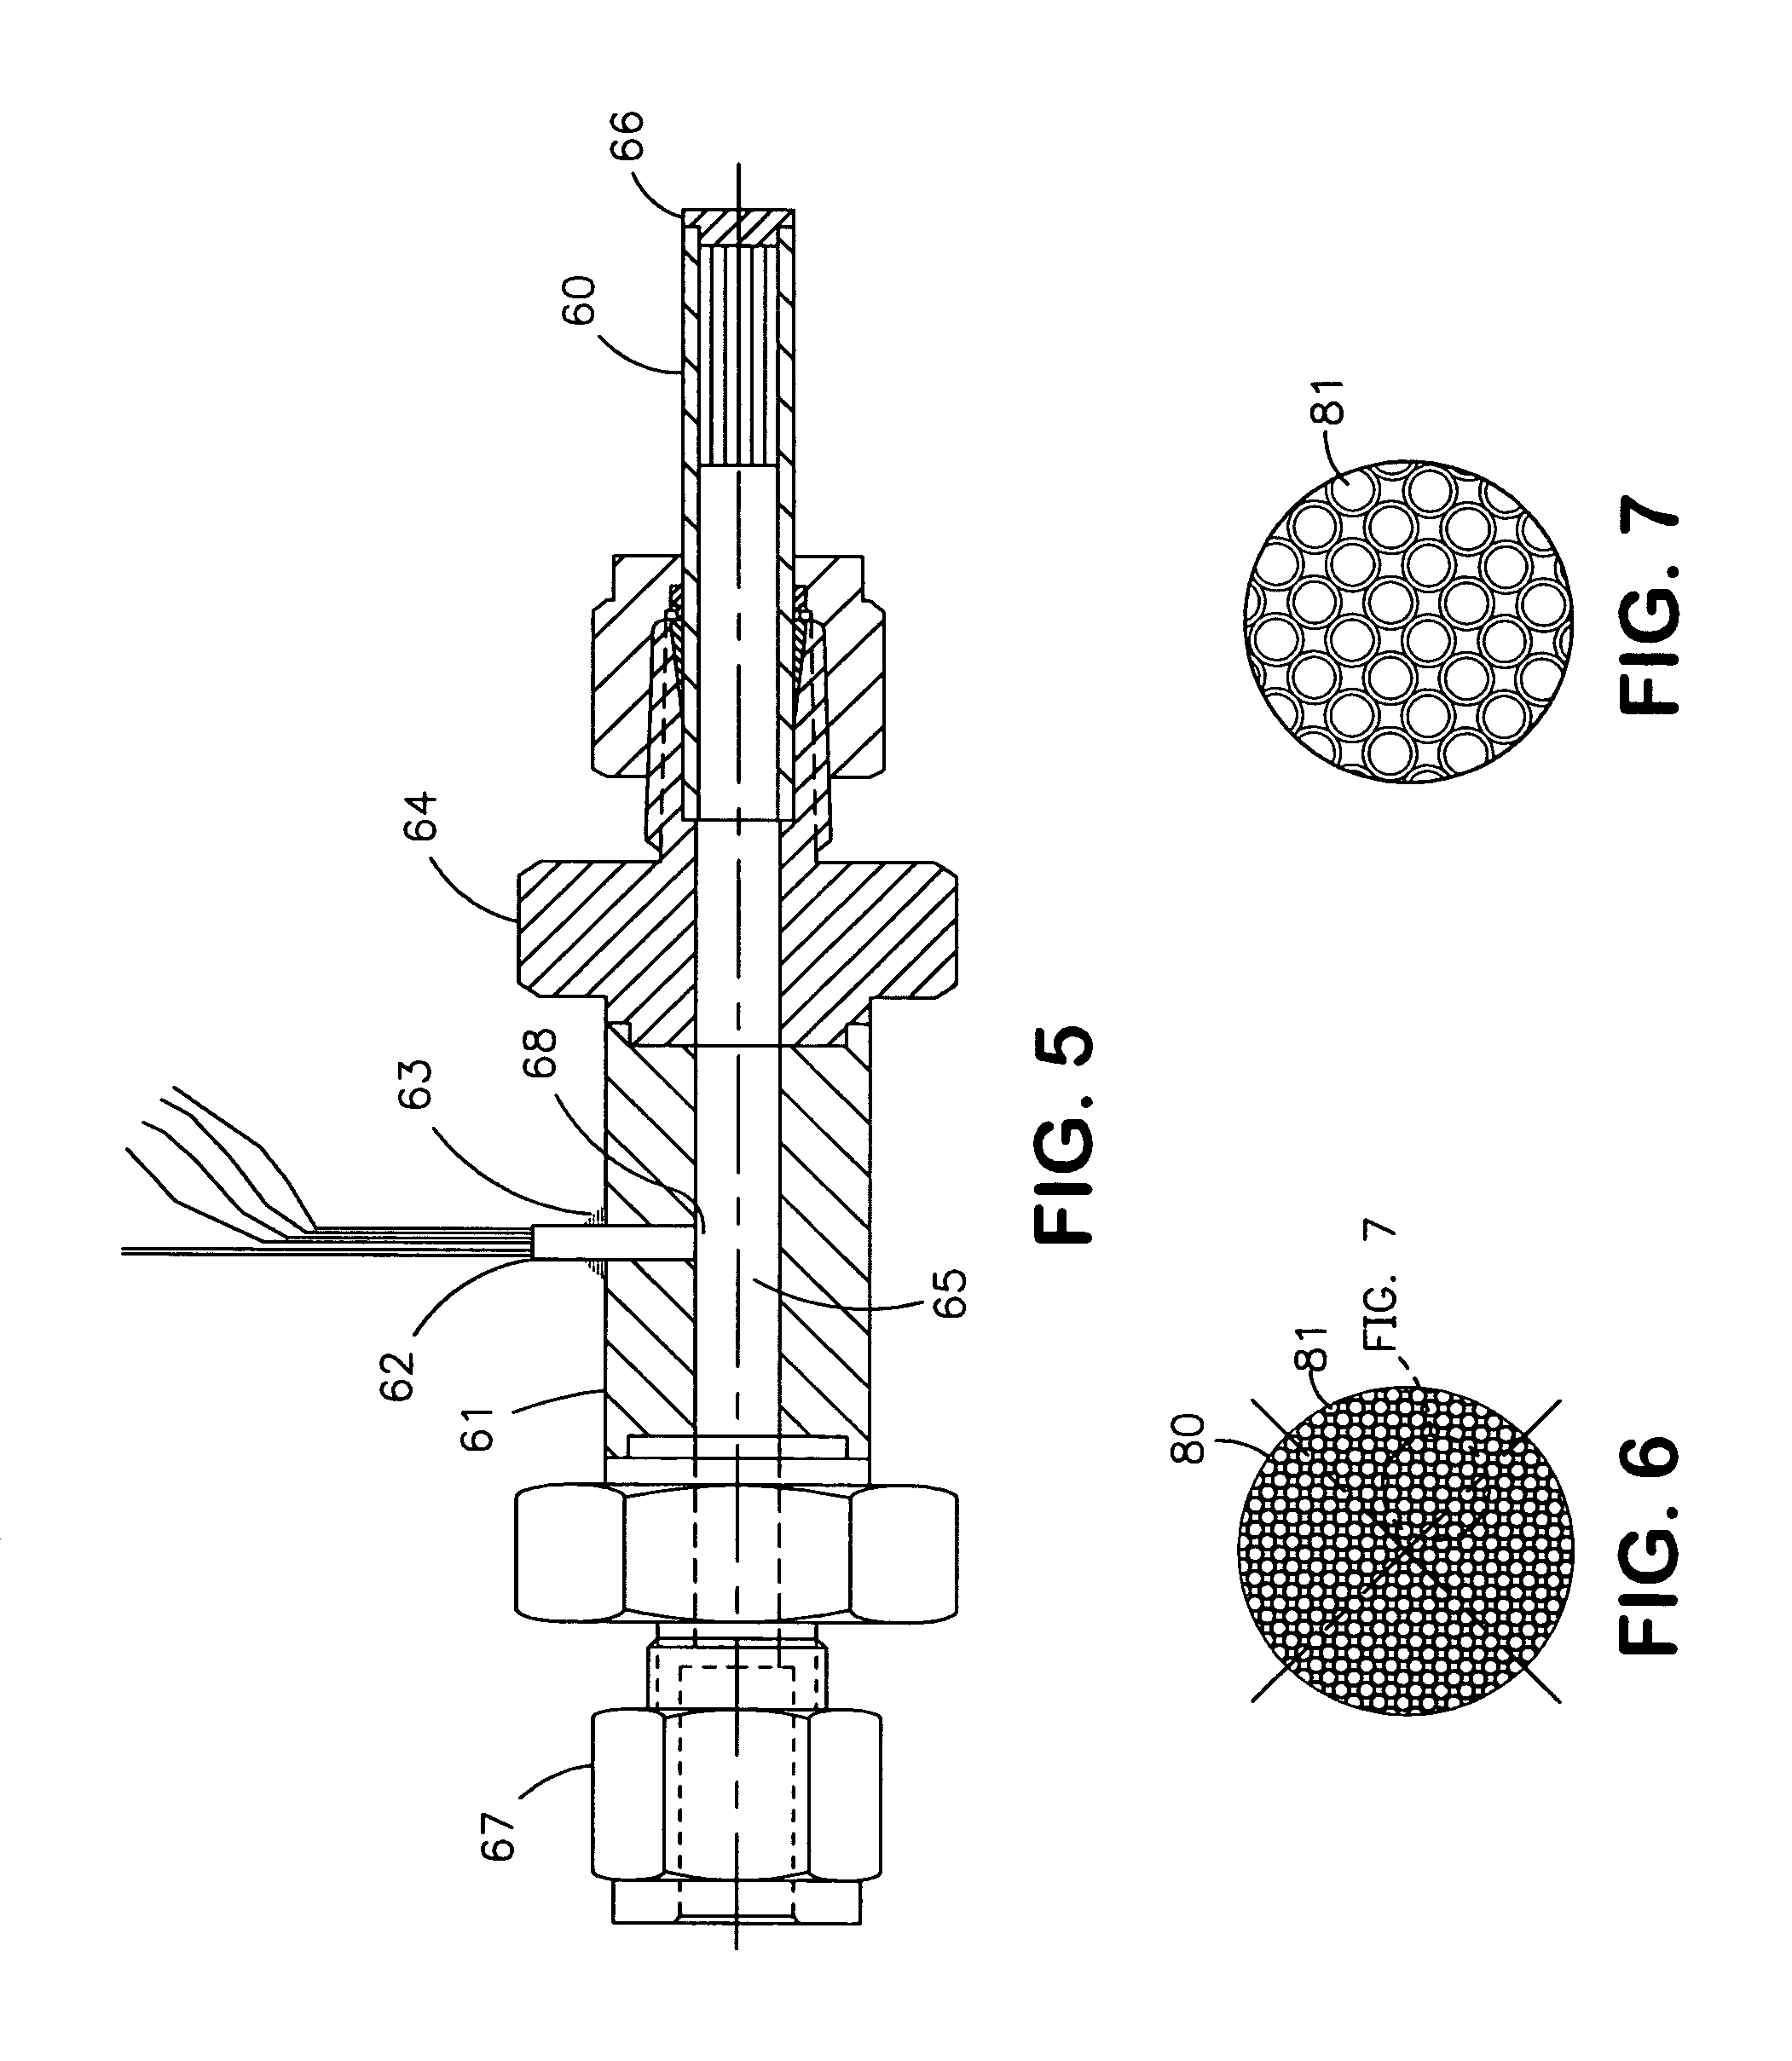 Pressure transducer employing a micro-filter and emulating an infinite tube pressure transducer